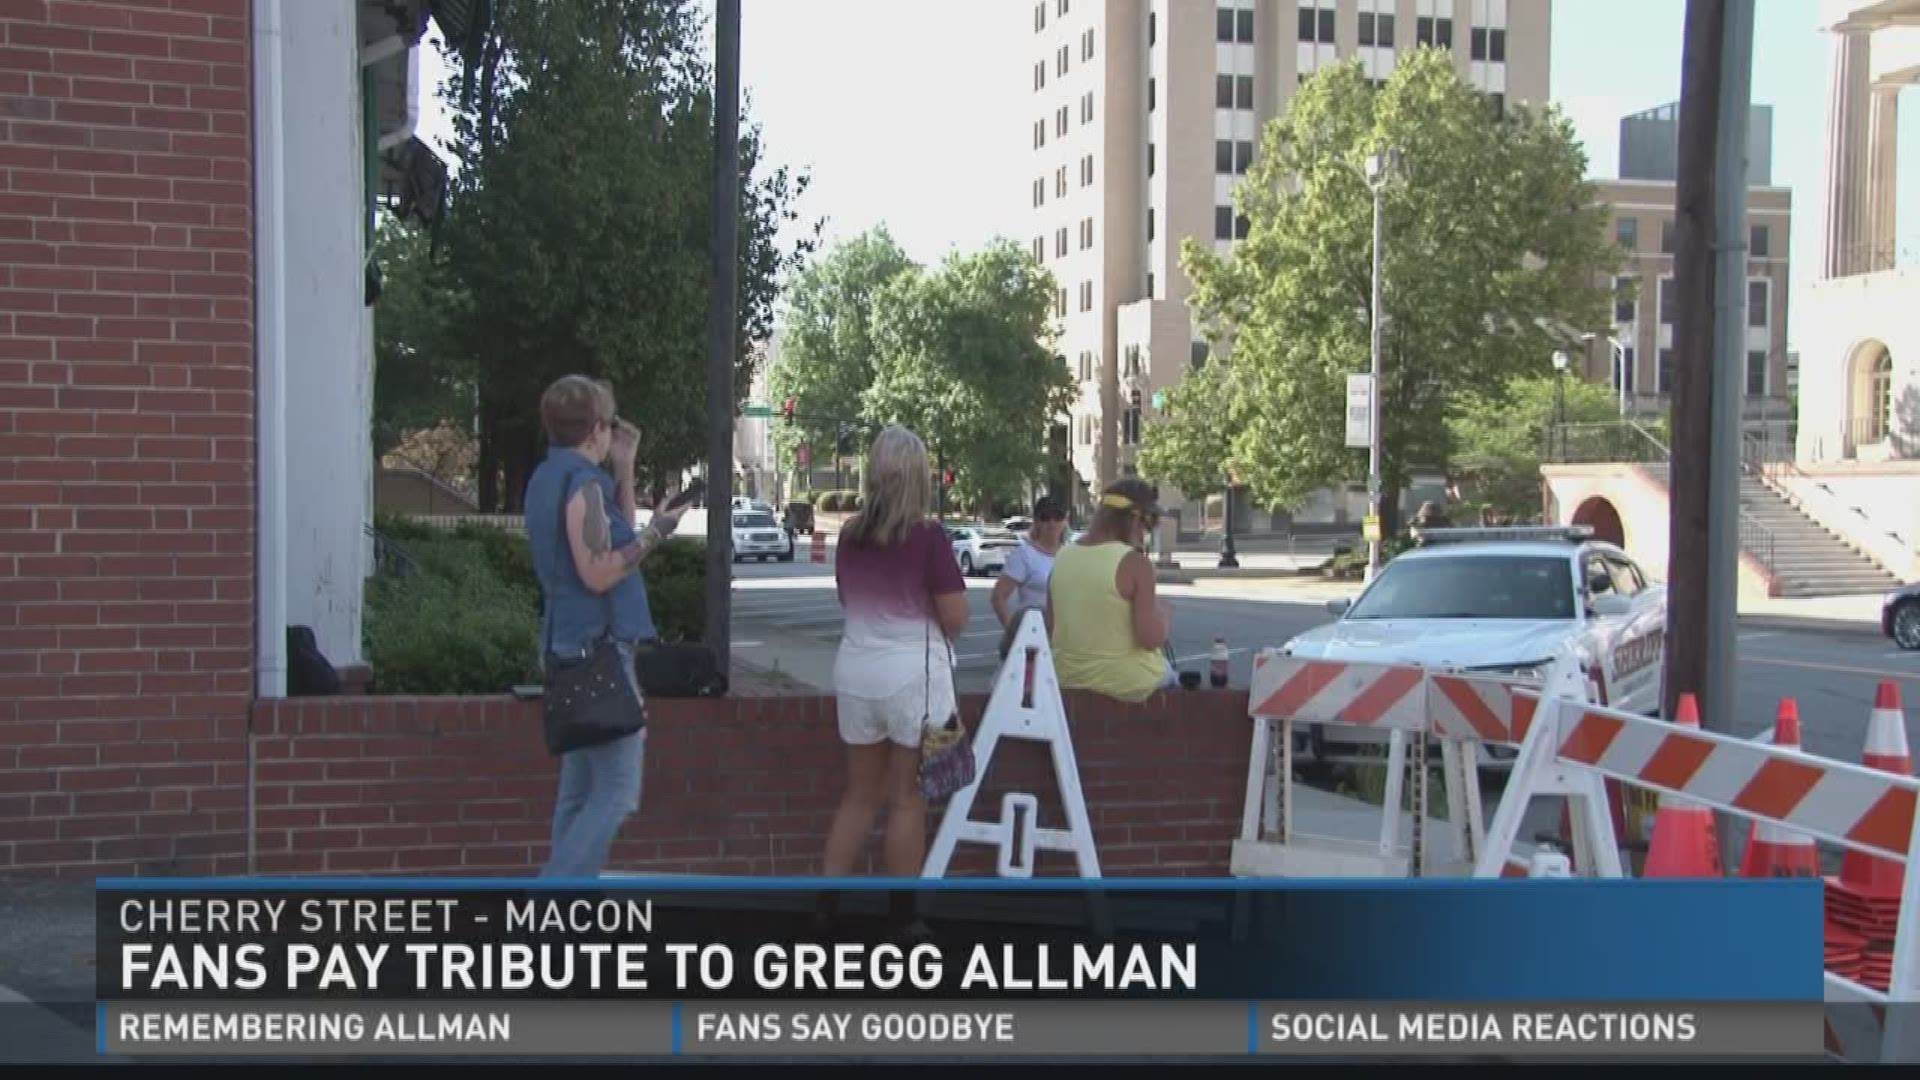 Fans pay tribute to Gregg Allman